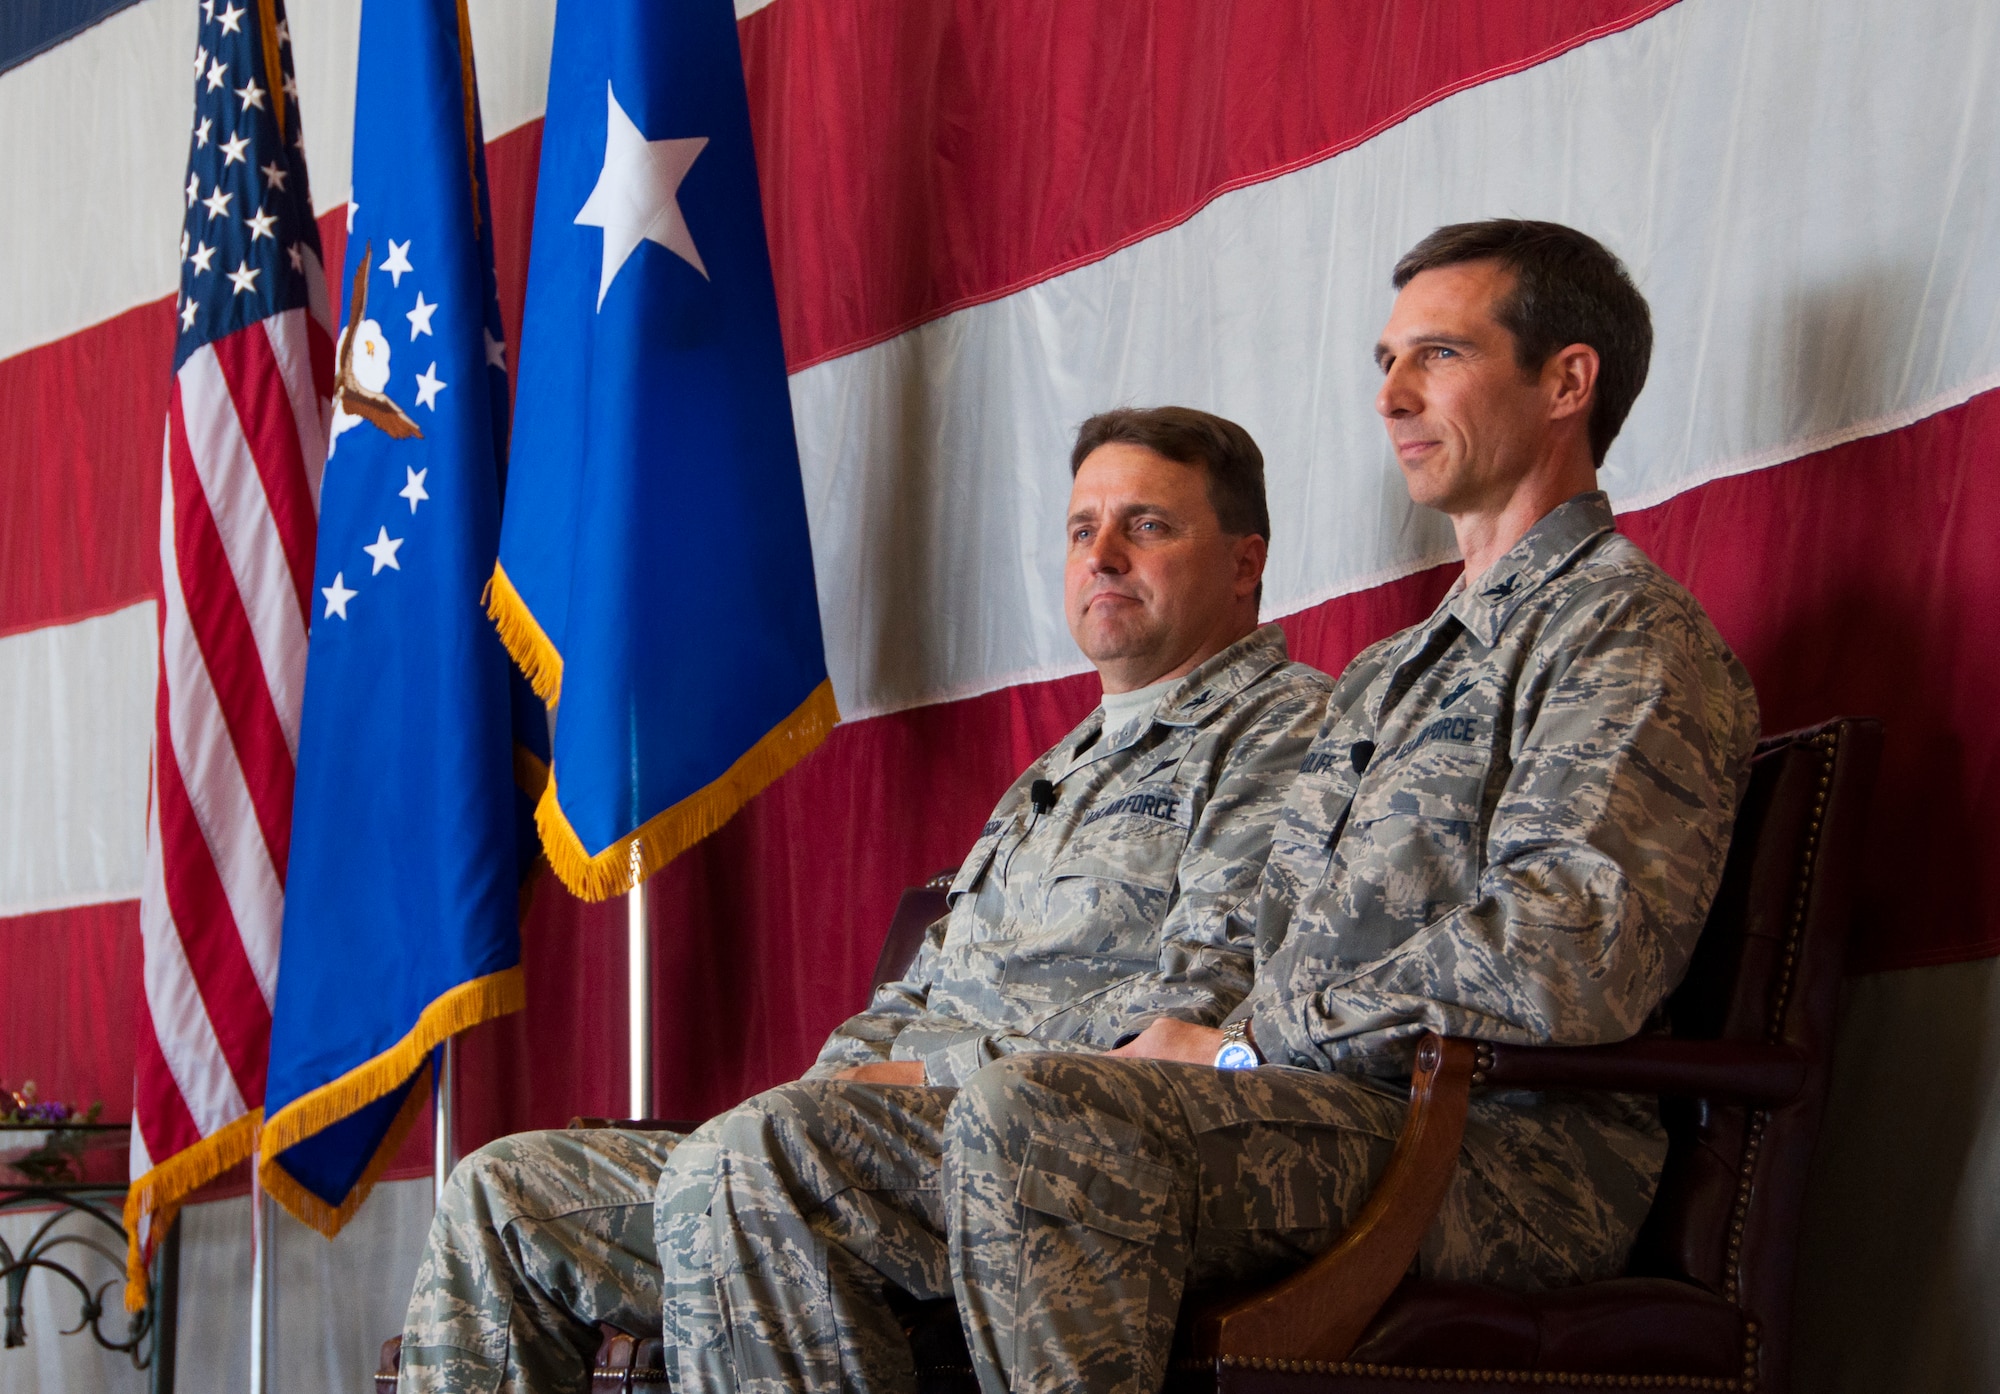 Col. Bryan Radliff, 419th Fighter Wing commander, and his predecessor, Col. Keith Knudson, sit on stage during the change of command ceremony here today. (U.S. Air Force photo/Senior Airman Crystal Charriere)